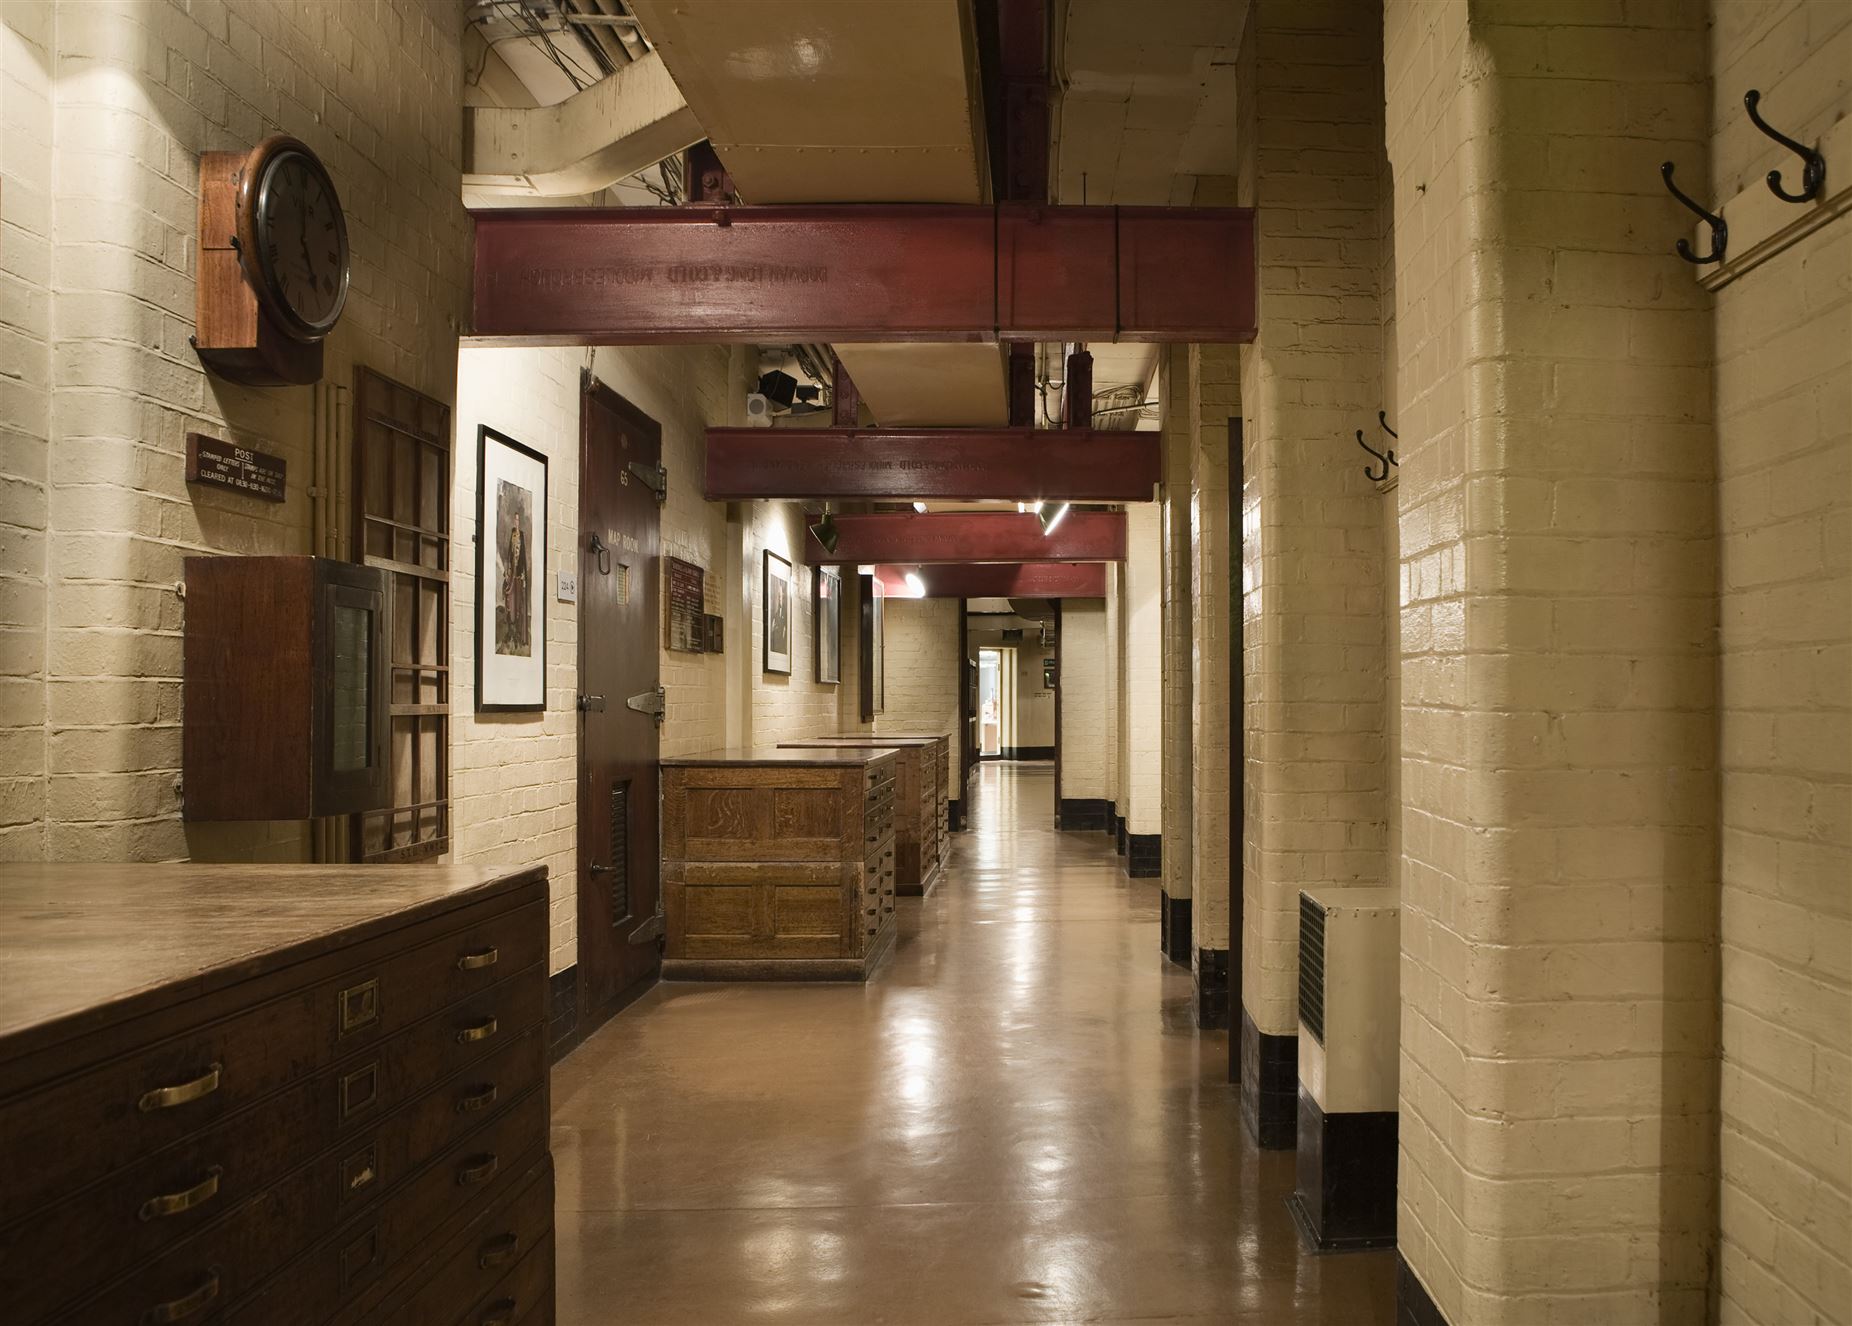  Churchill War Rooms Corridor. By permission of The Imperial War Museums 